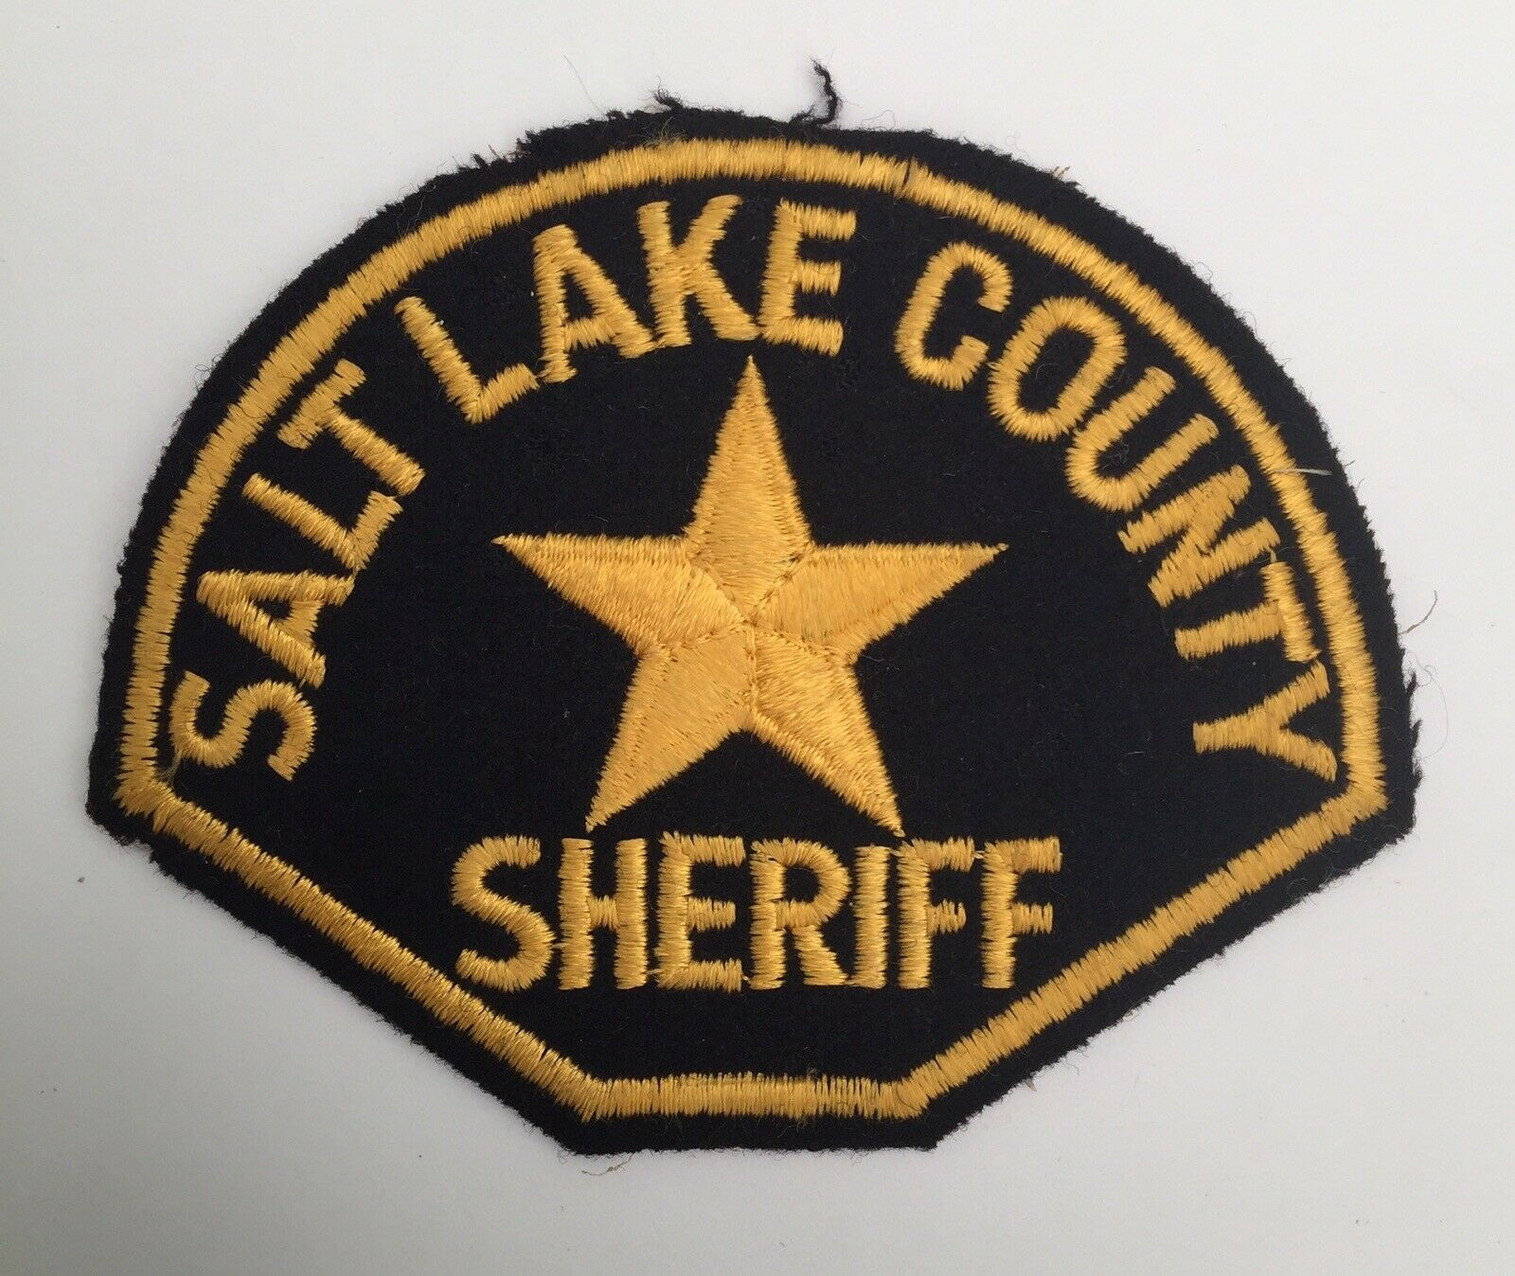 Salt Lake County County UT Sheriff Police Patch - Small